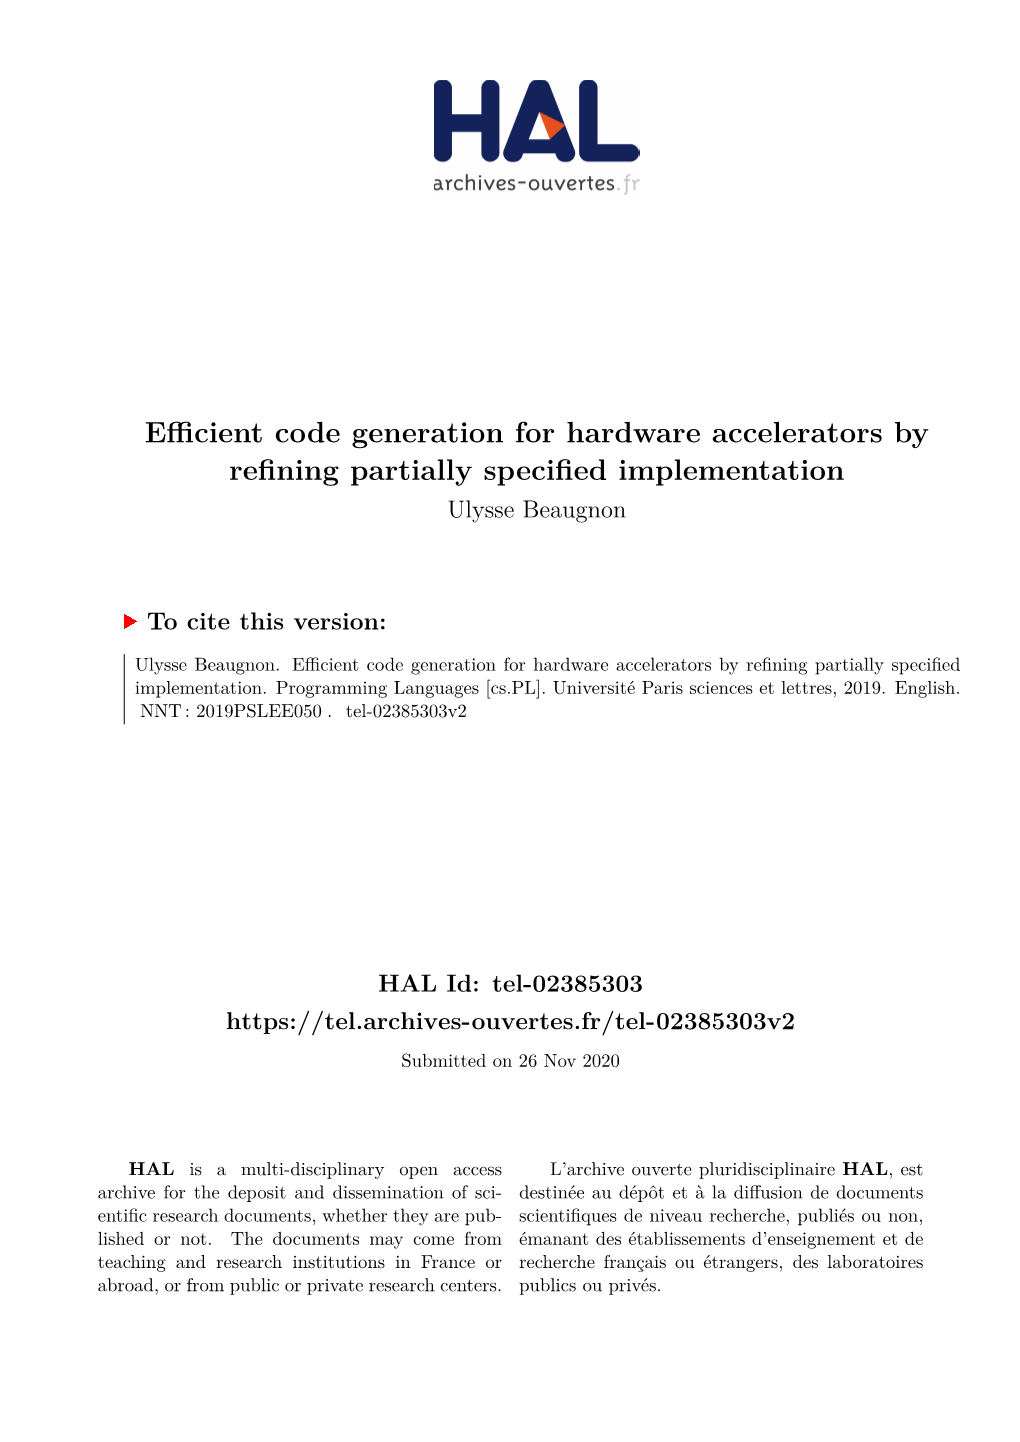 Efficient Code Generation for Hardware Accelerators by Refining Partially Specified Implementation